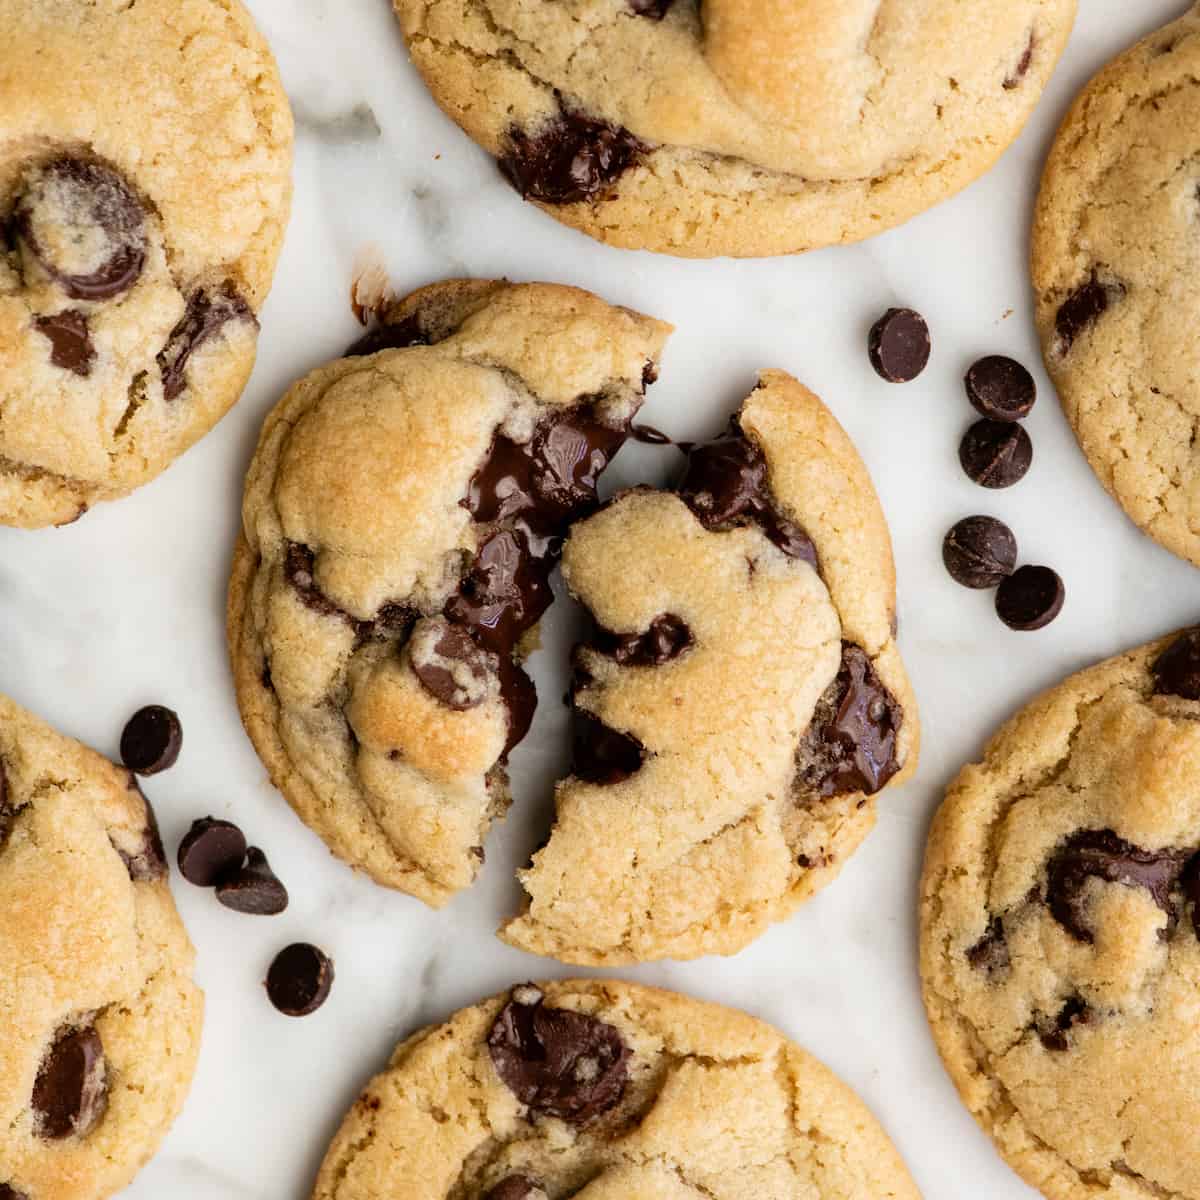 Top 10 Recipes - chocolate chip cookies